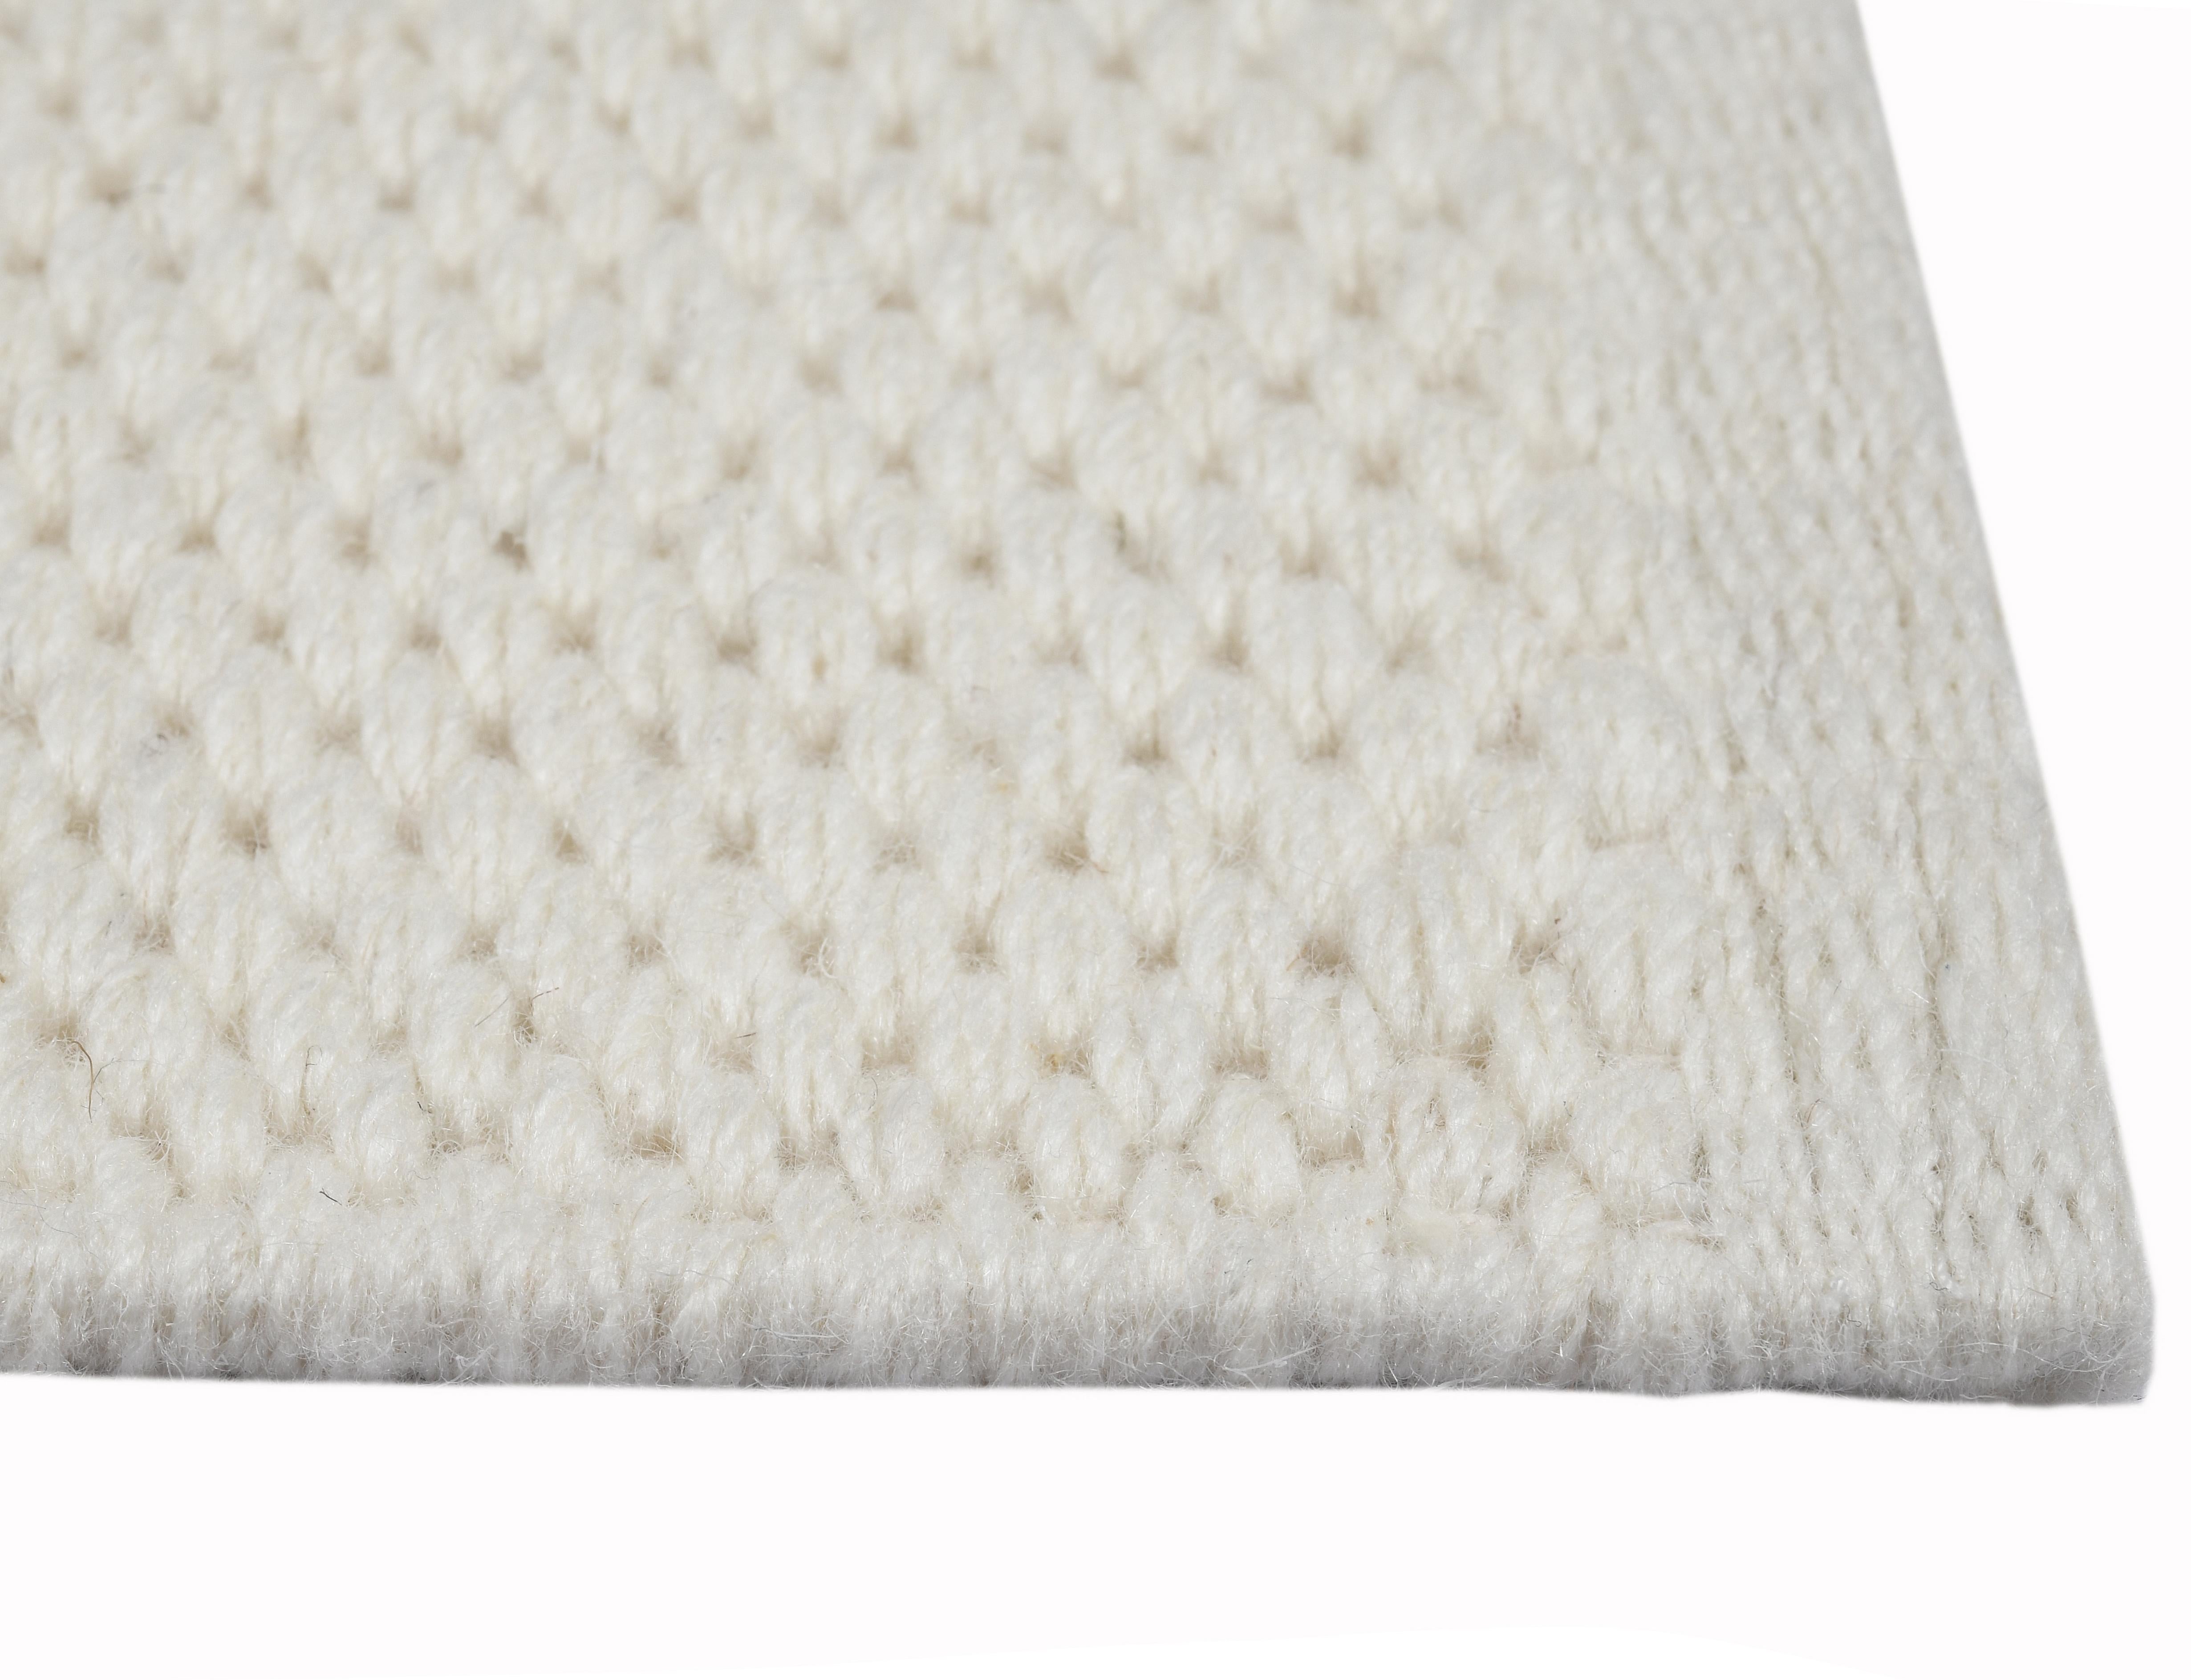 Hand-Woven Quies, Ivory, Handwoven, New Zealand and Mediterranean wools, 8' x 10' For Sale